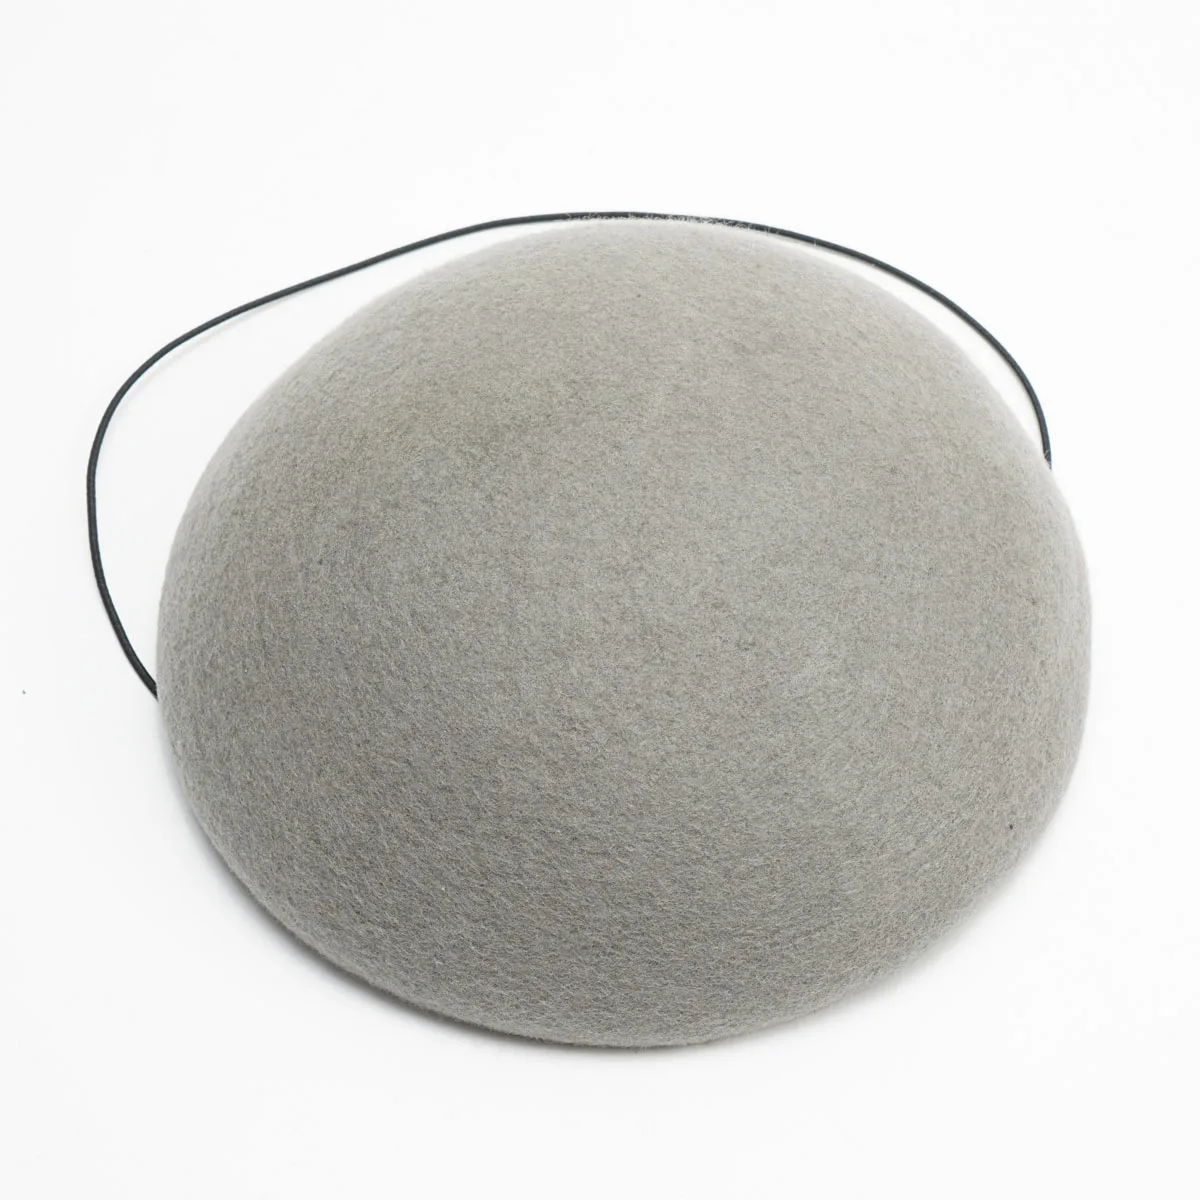 14cm Circle Button Wool Felt Hat Millinery Supply Fascinator Base Cocktail A263 